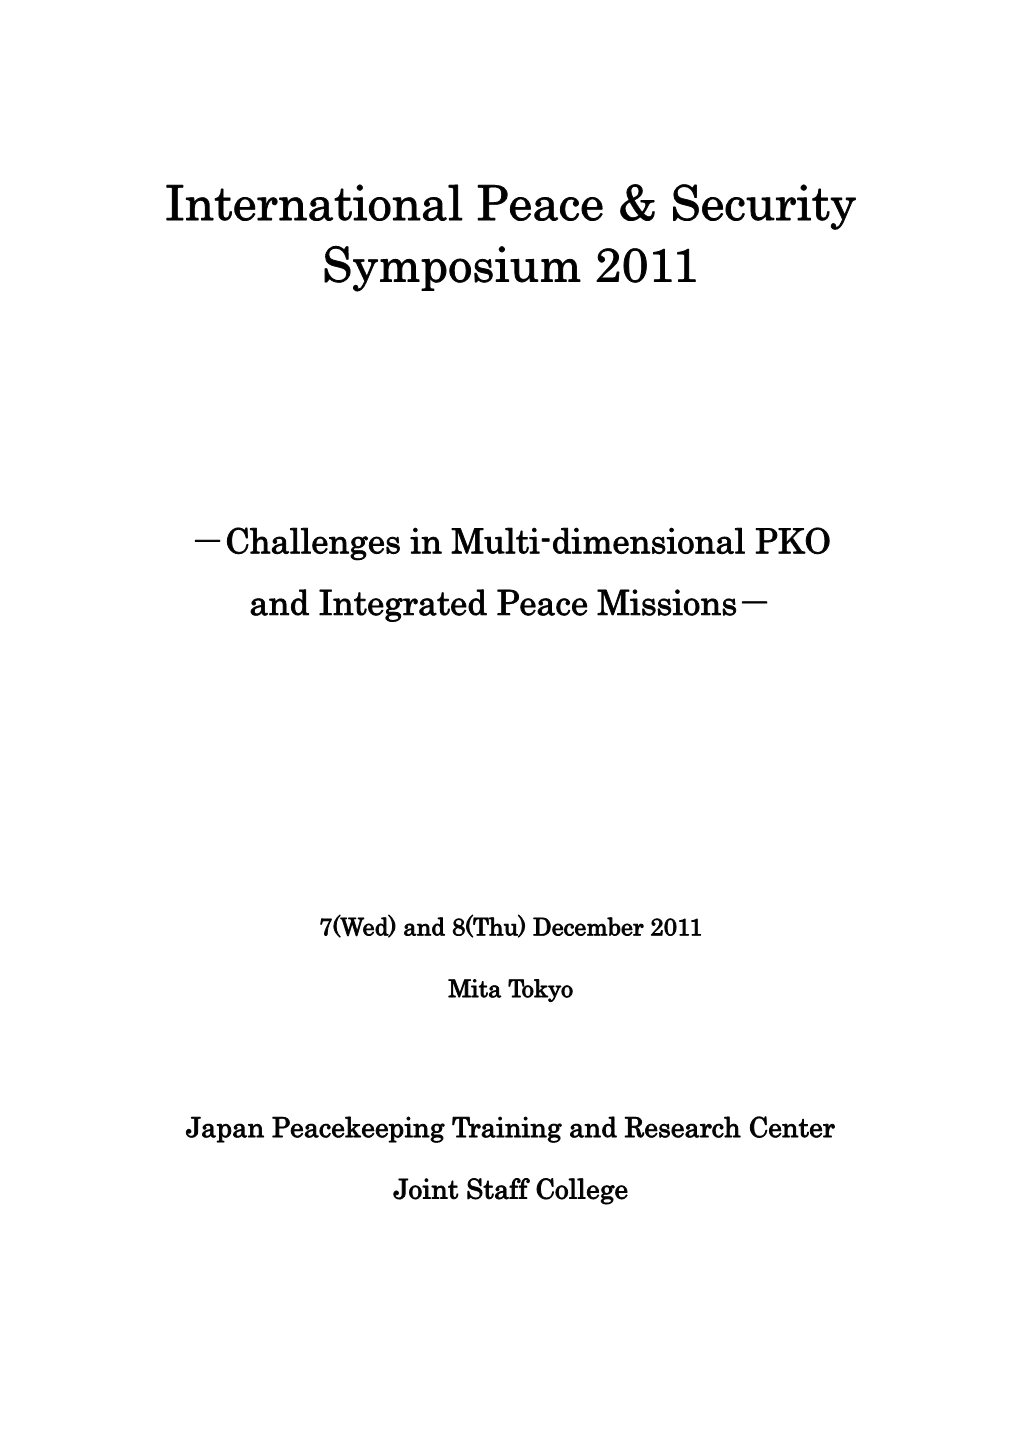 Abstract International Peace & Security Symposium 2011